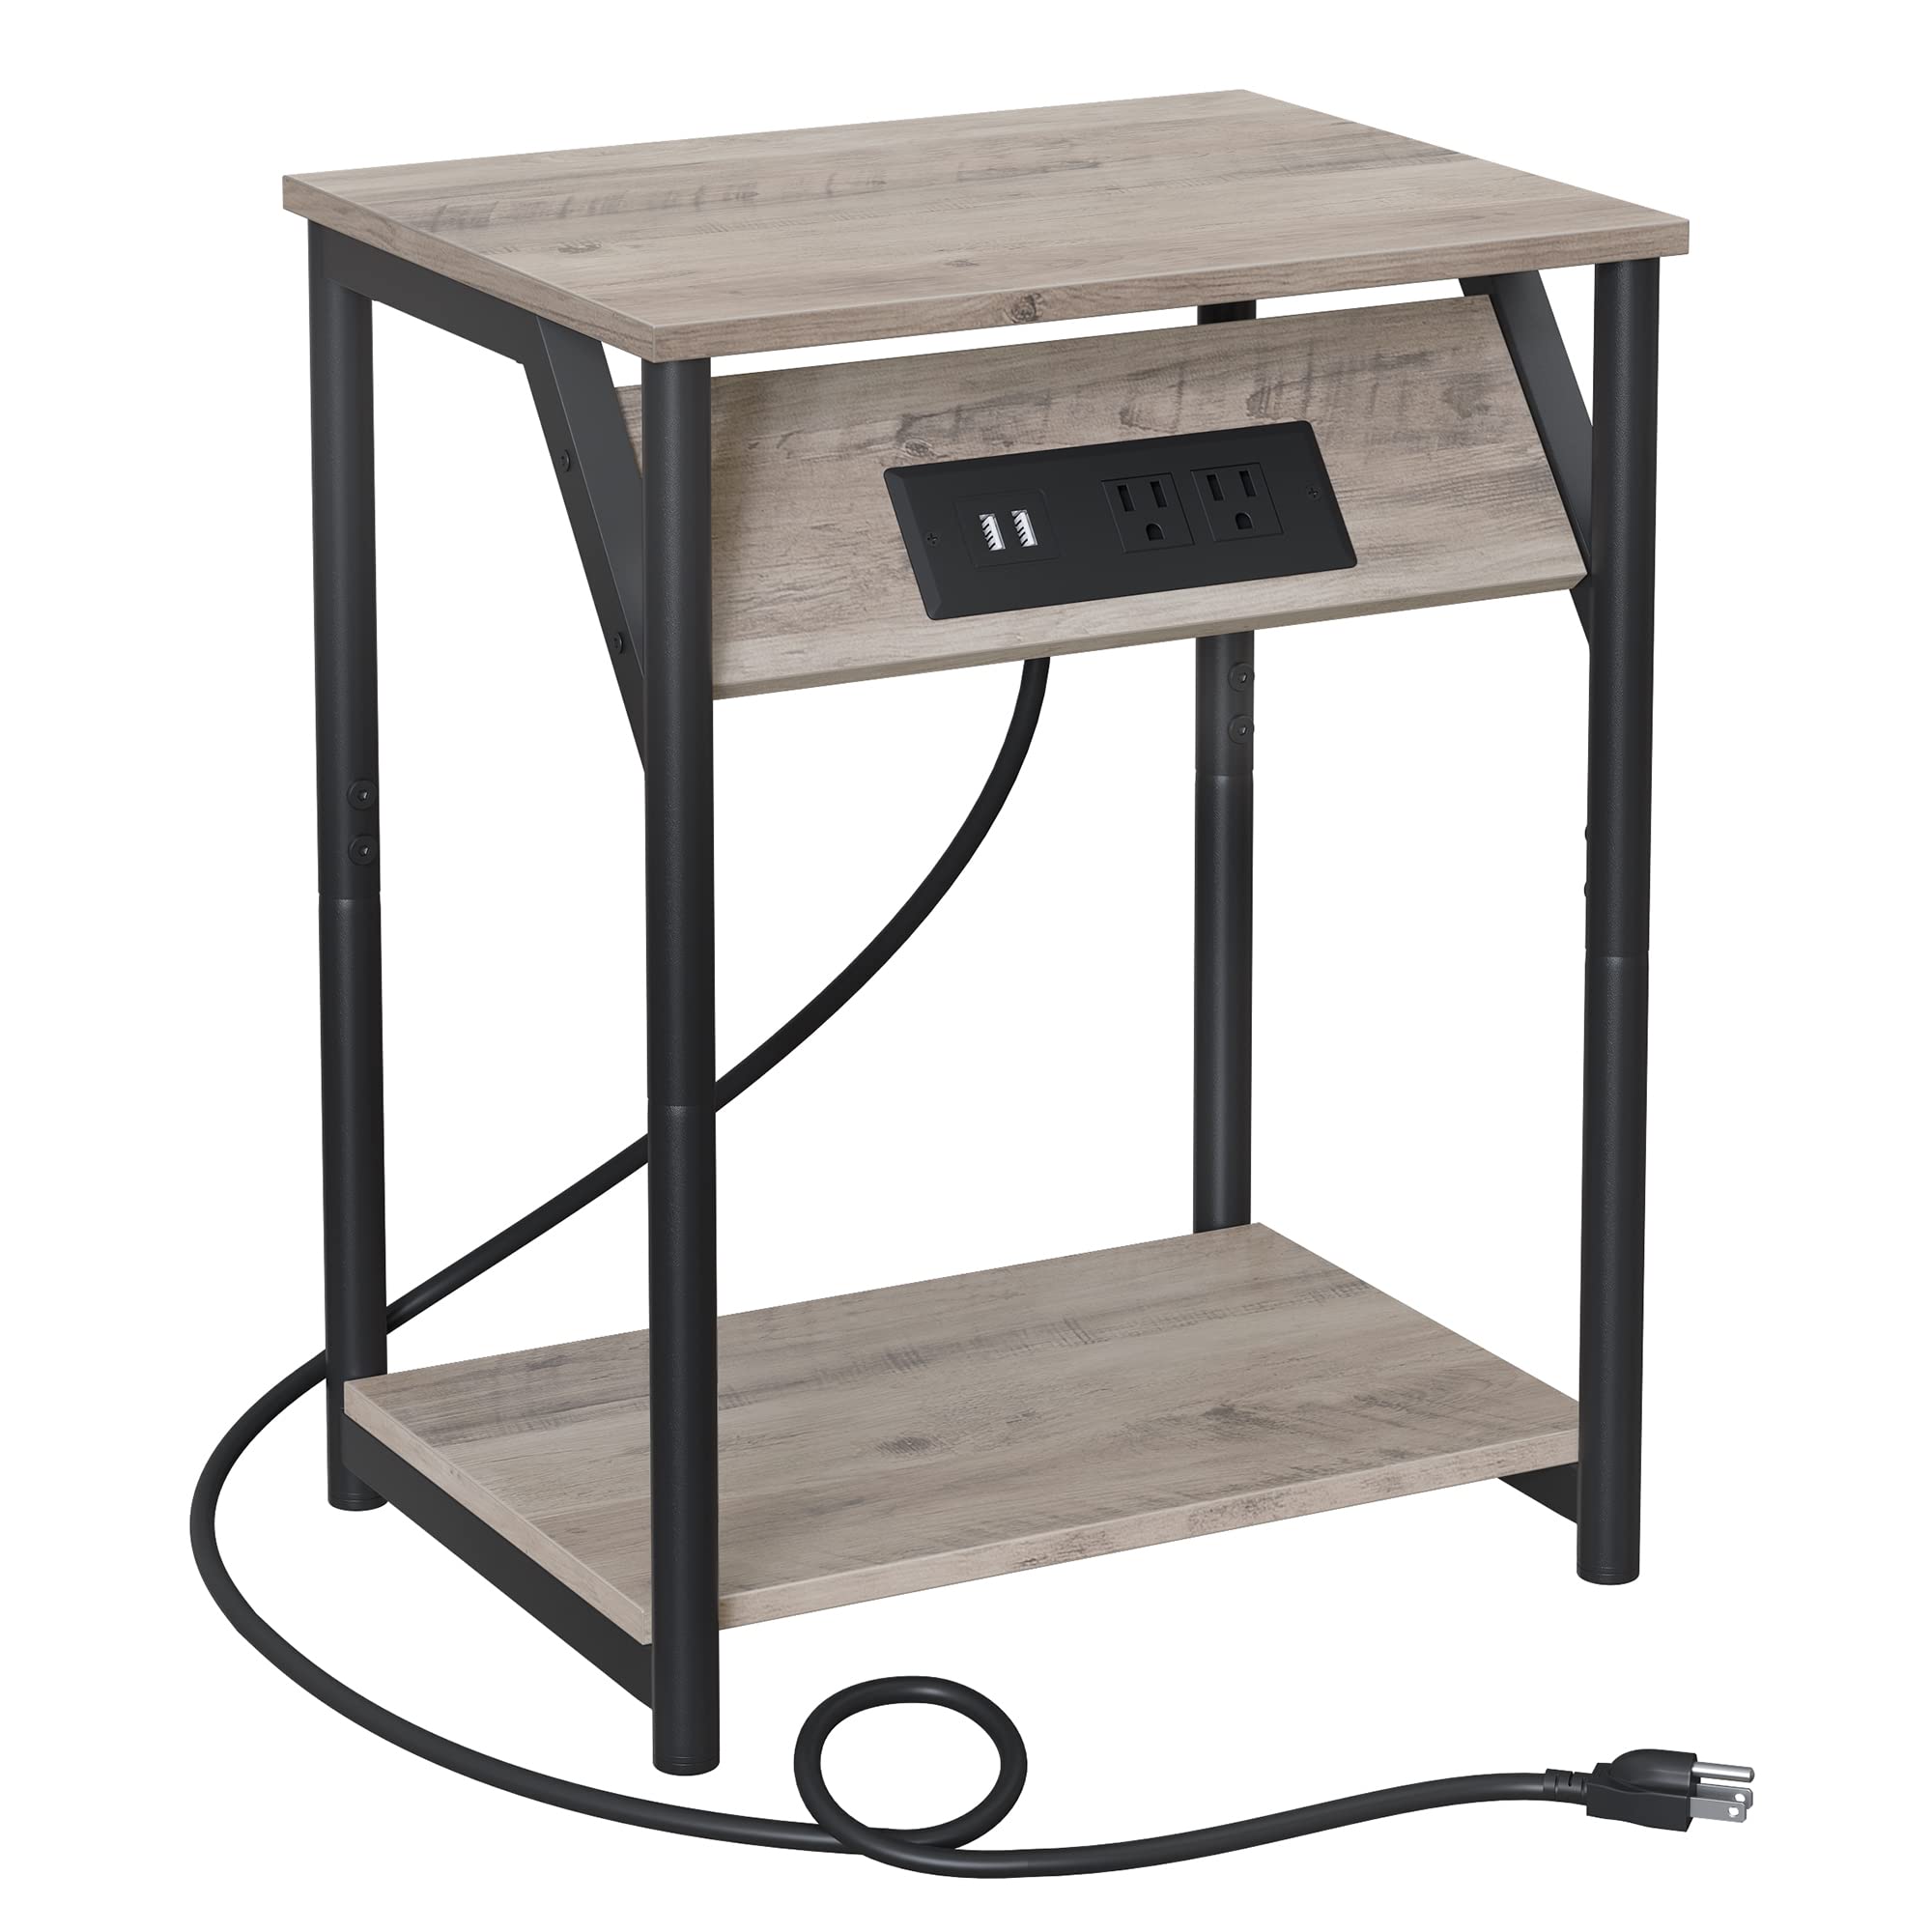 VASAGLE Side Table with Charging Station, End Table with 2 AC Outlets 2 USB Ports